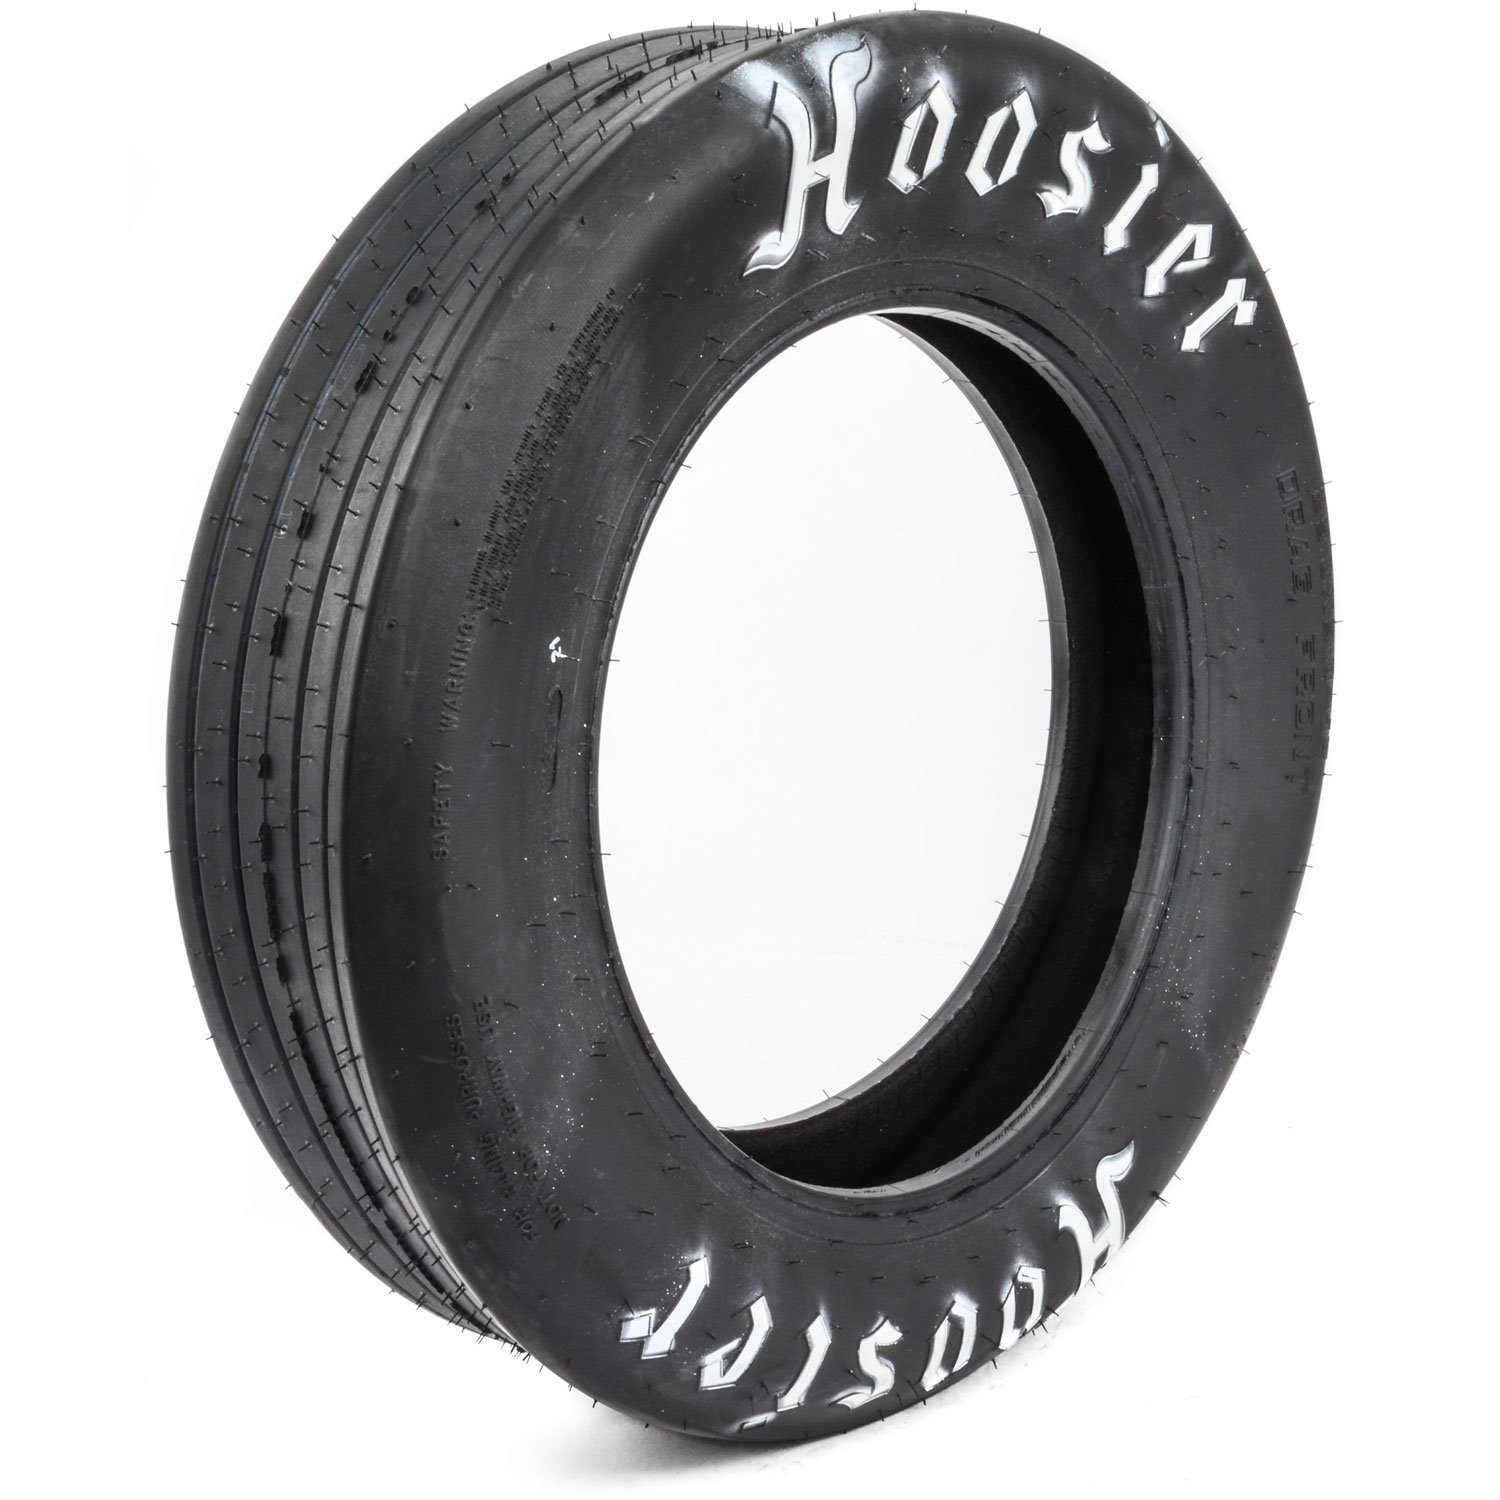 18102 Front Drag Racing Tire 25 x 5-15